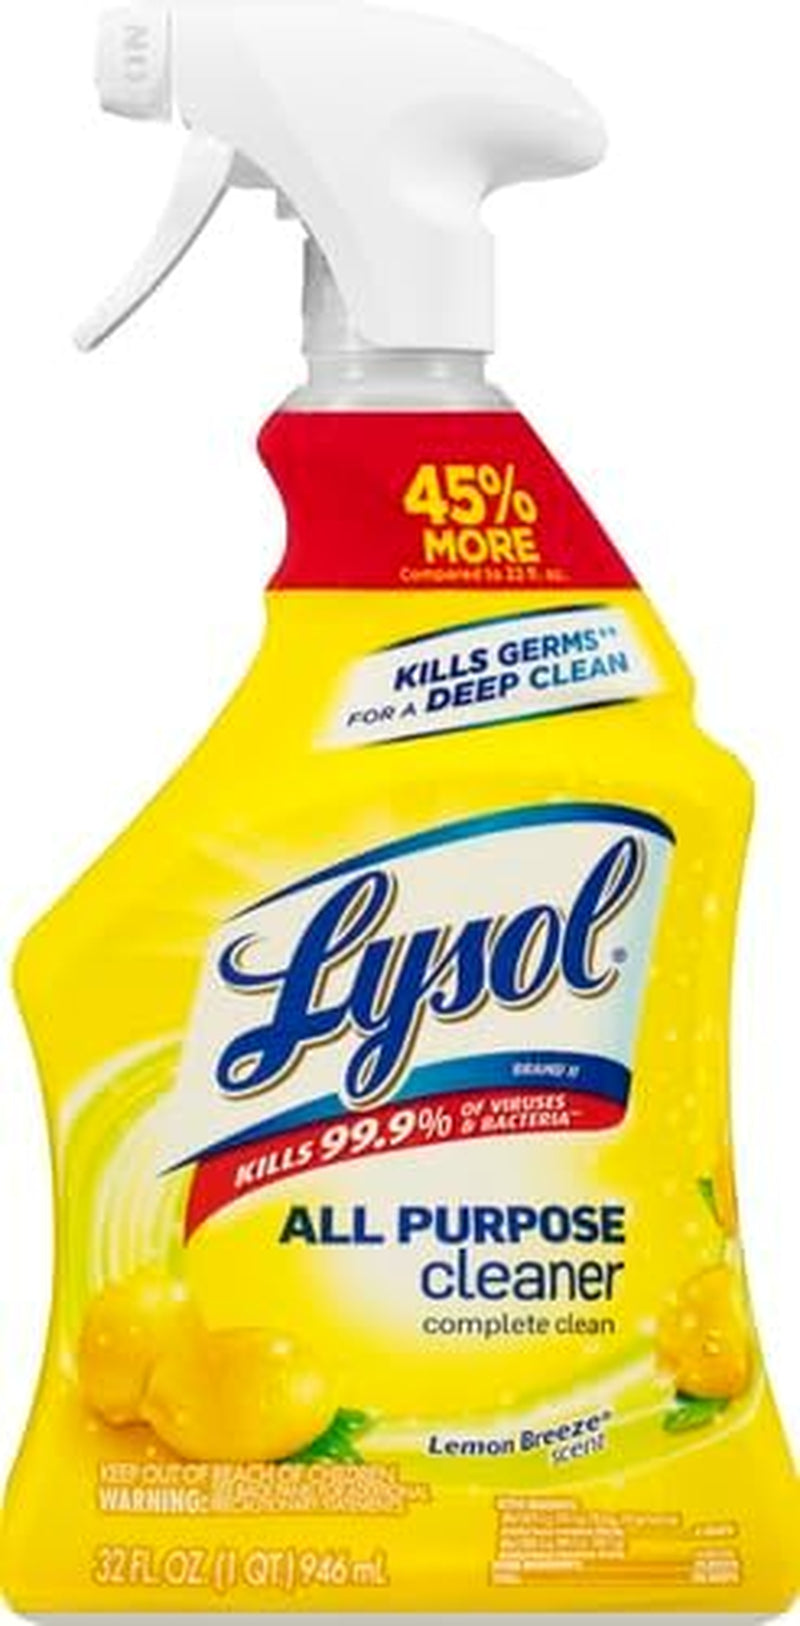 All-Purpose Cleaner, Sanitizing and Disinfecting Spray, to Clean and Deodorize, Lemon Breeze Scent, 32Oz